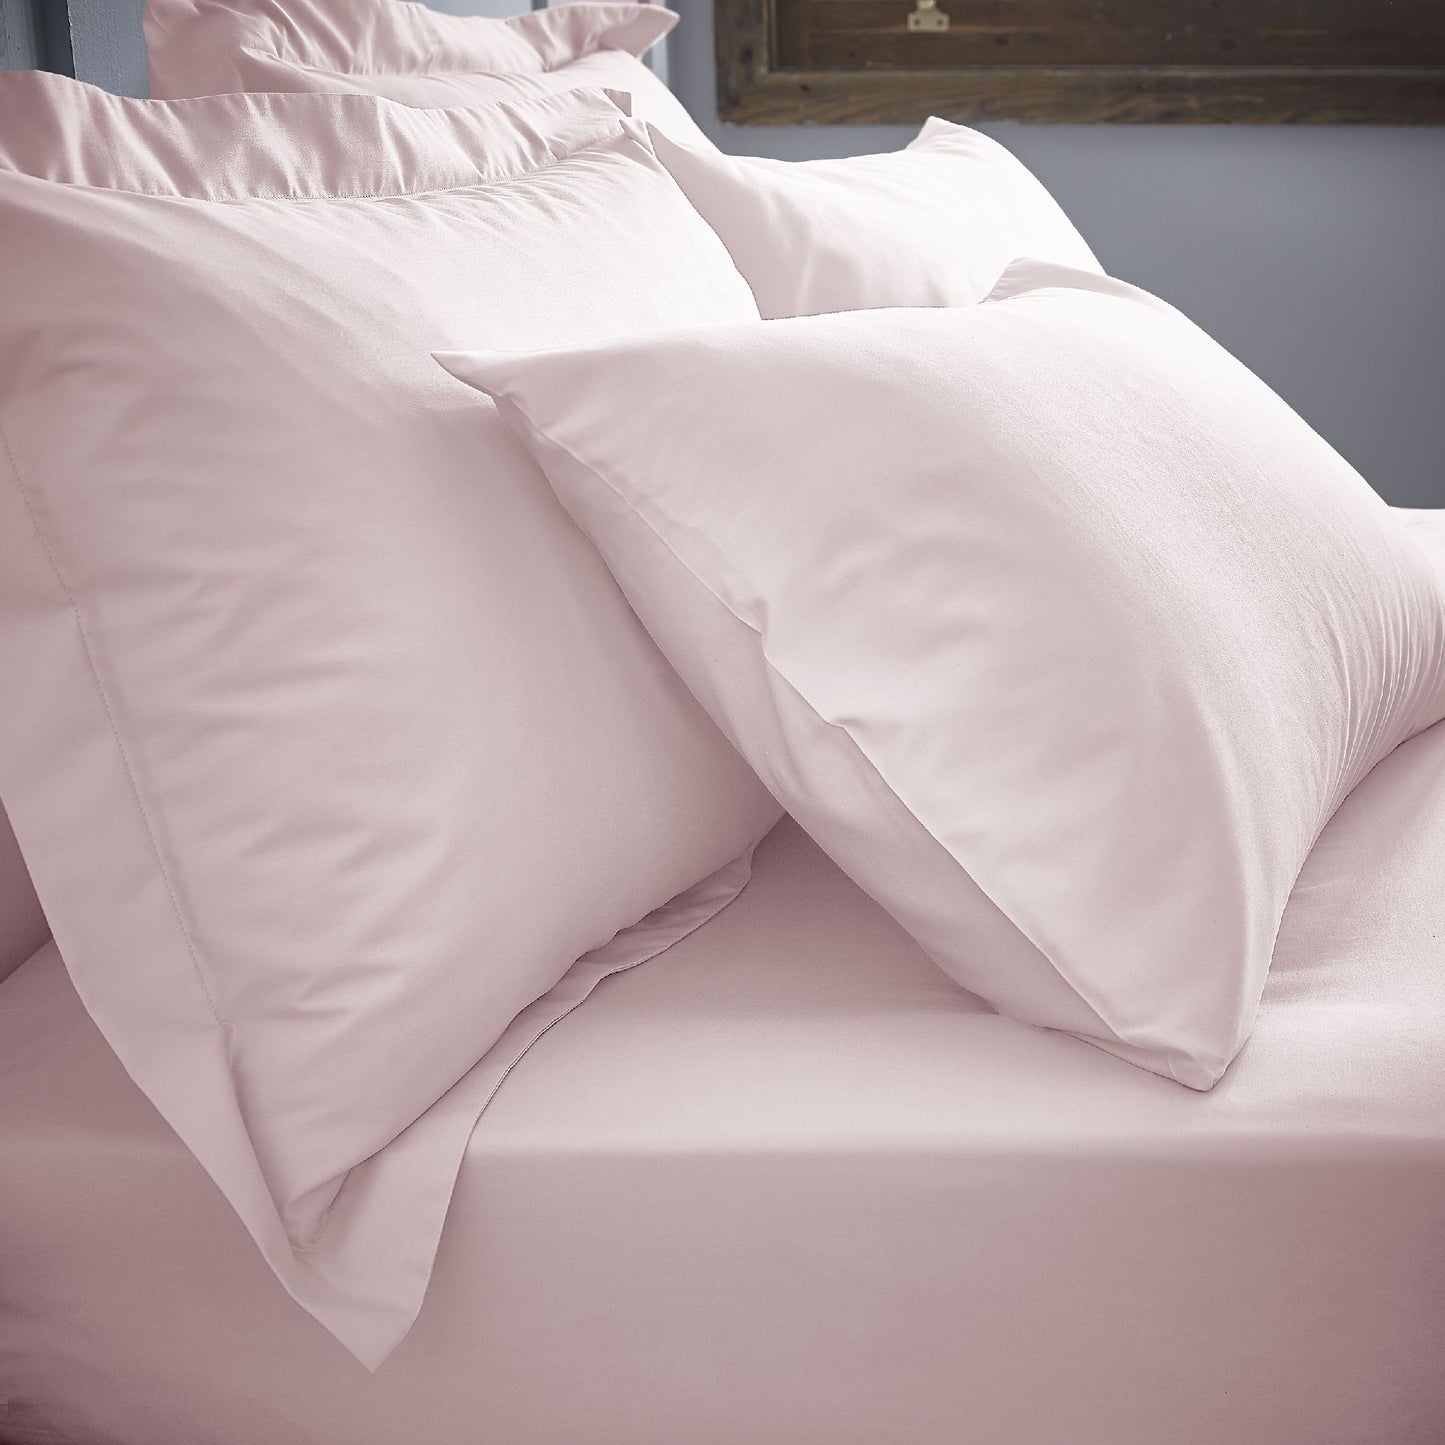 Bianca Pink 200TC 100% Cotton Percale Deep (32cm) Fitted Sheet